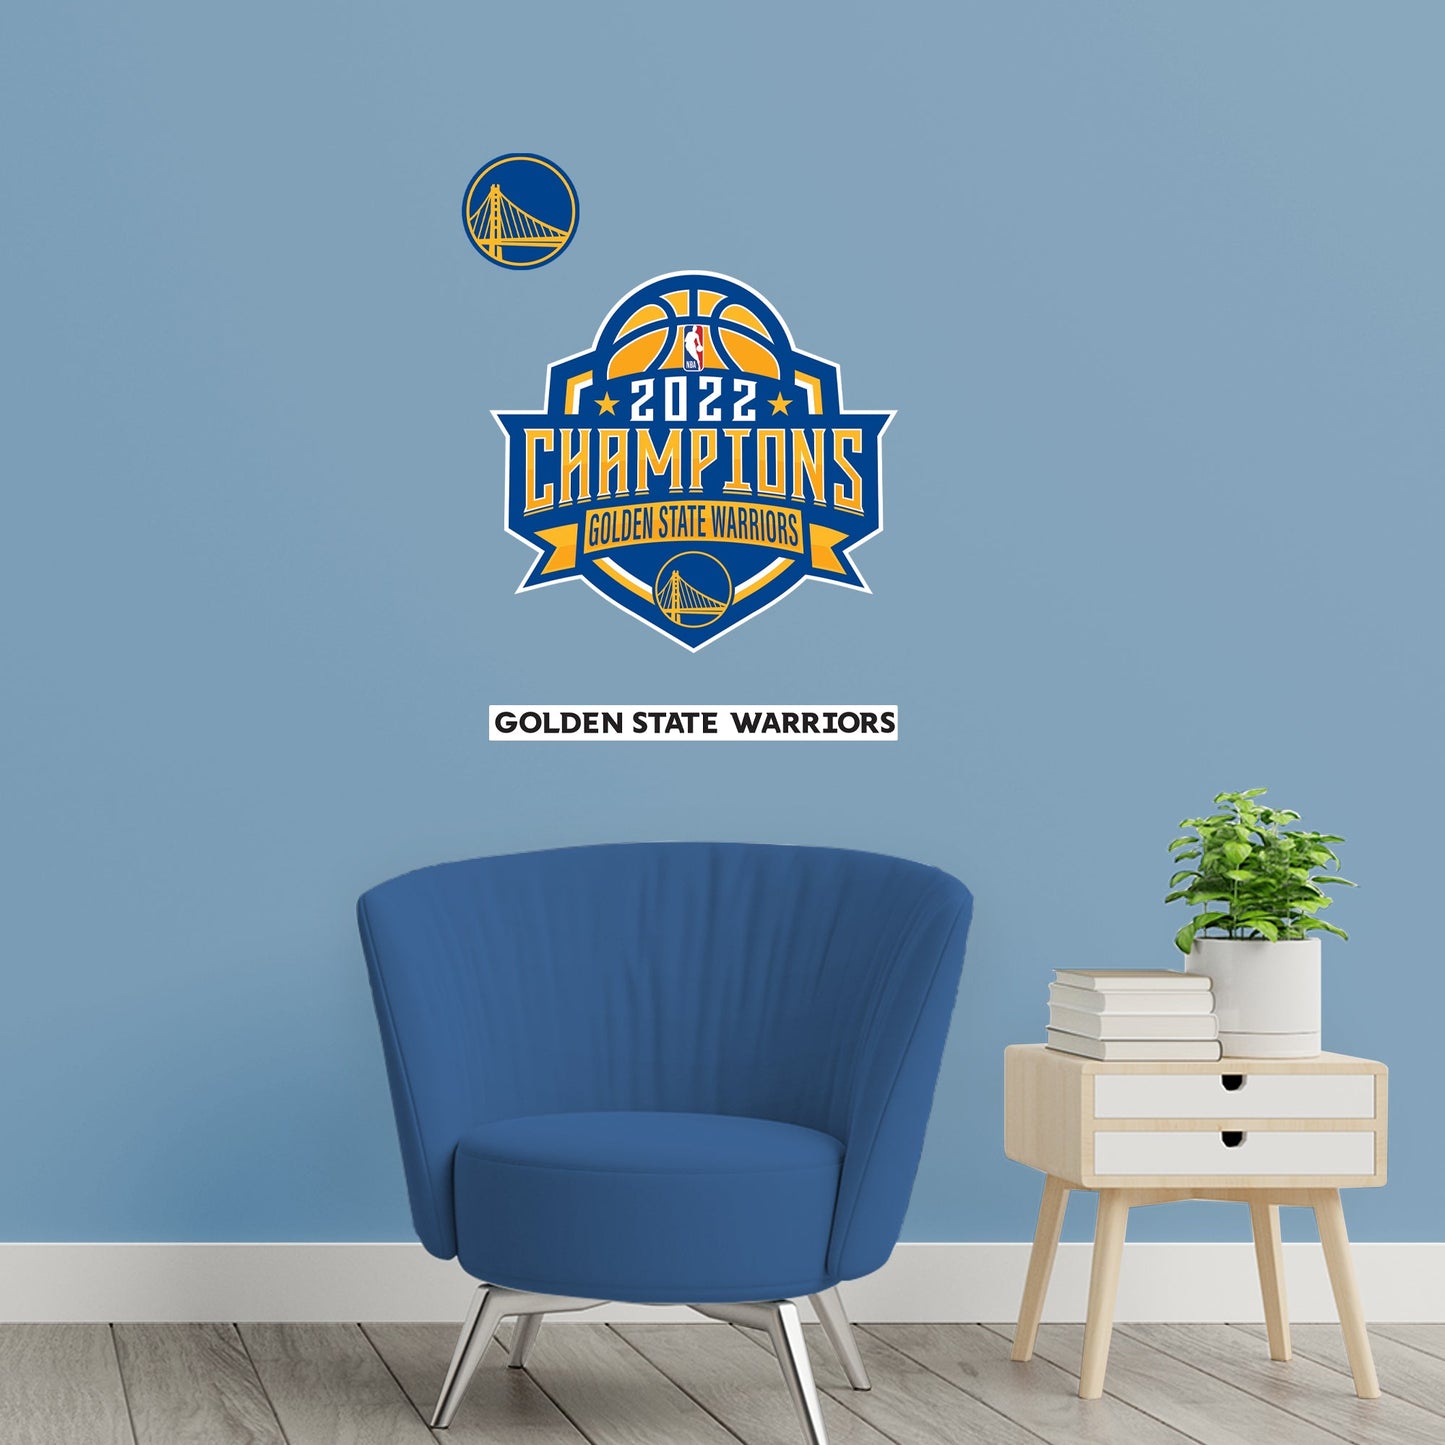 Golden State Warriors: 2022 Champions Logo - Officially Licensed NBA Removable Adhesive Decal